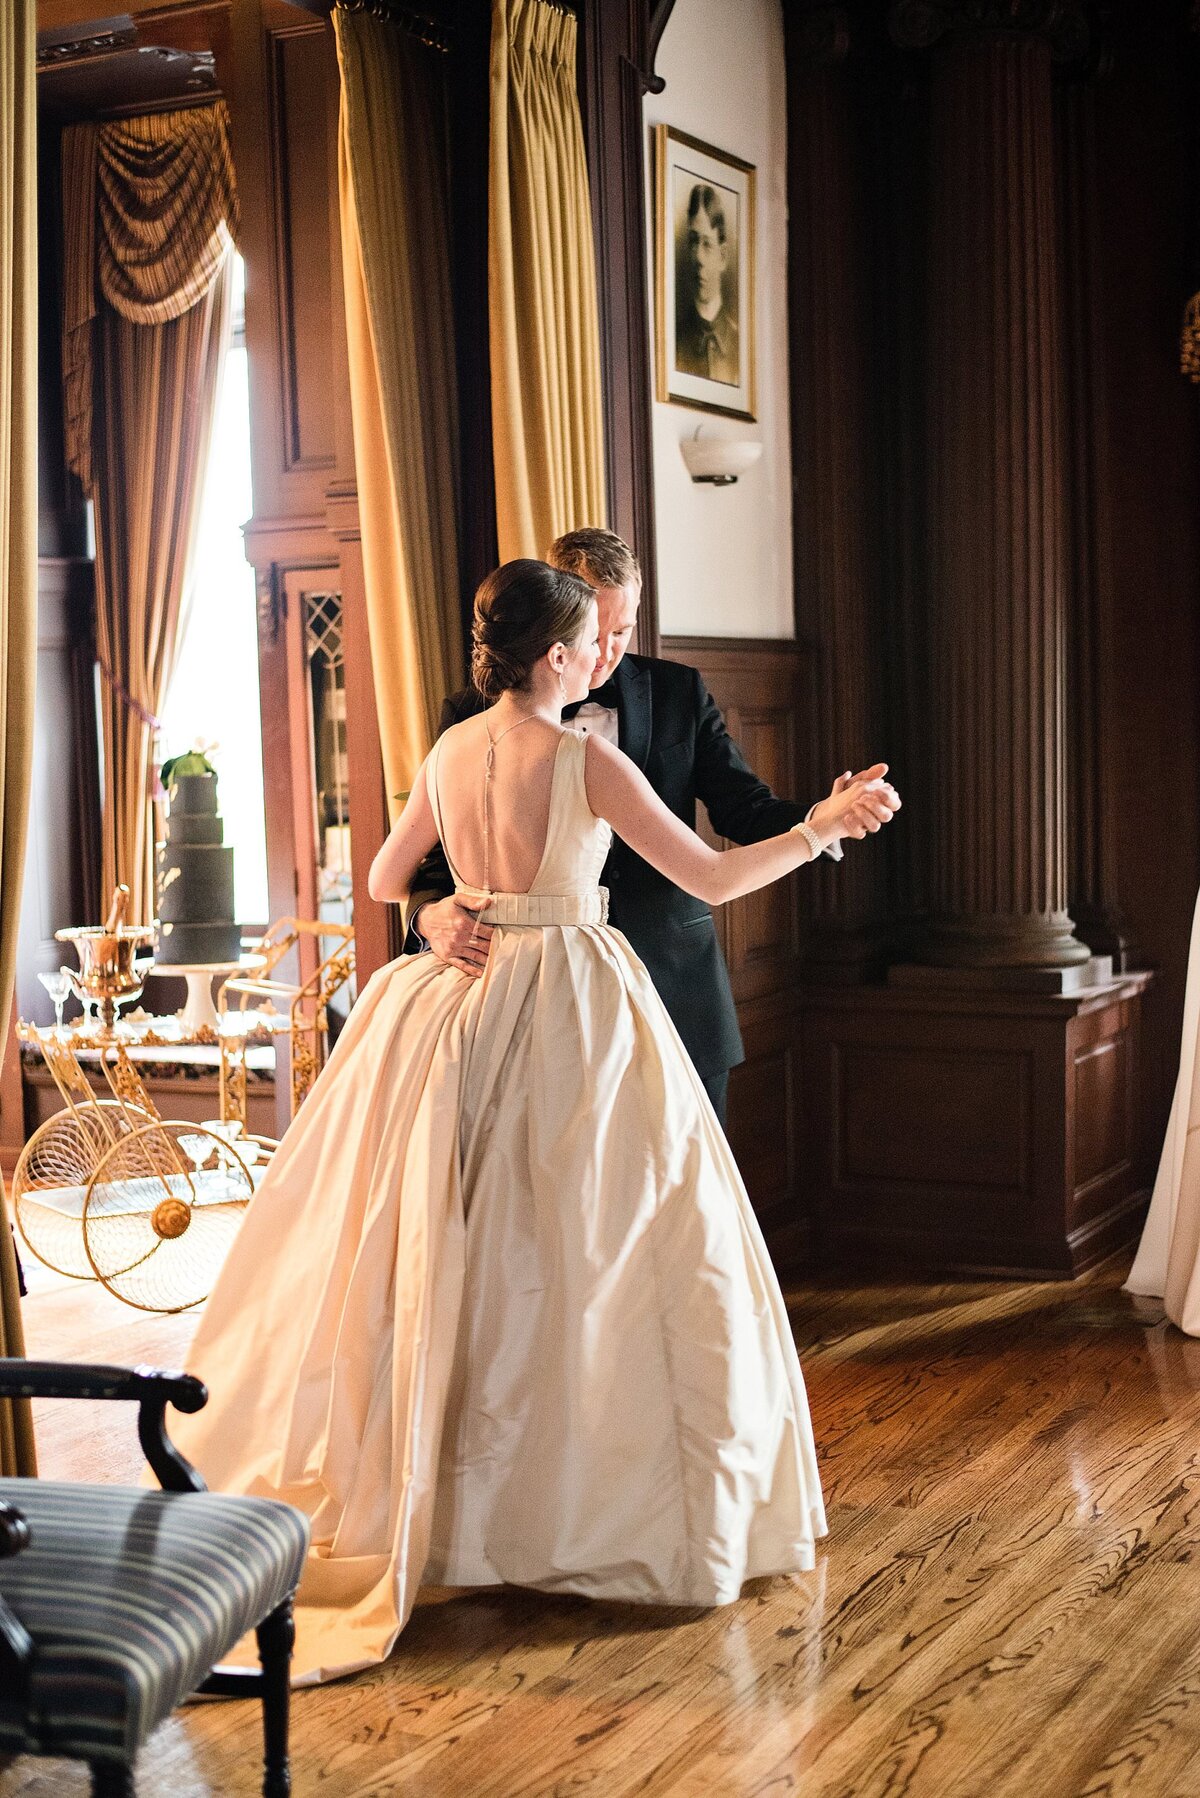 Couple sharing a romantic dance inside historic home